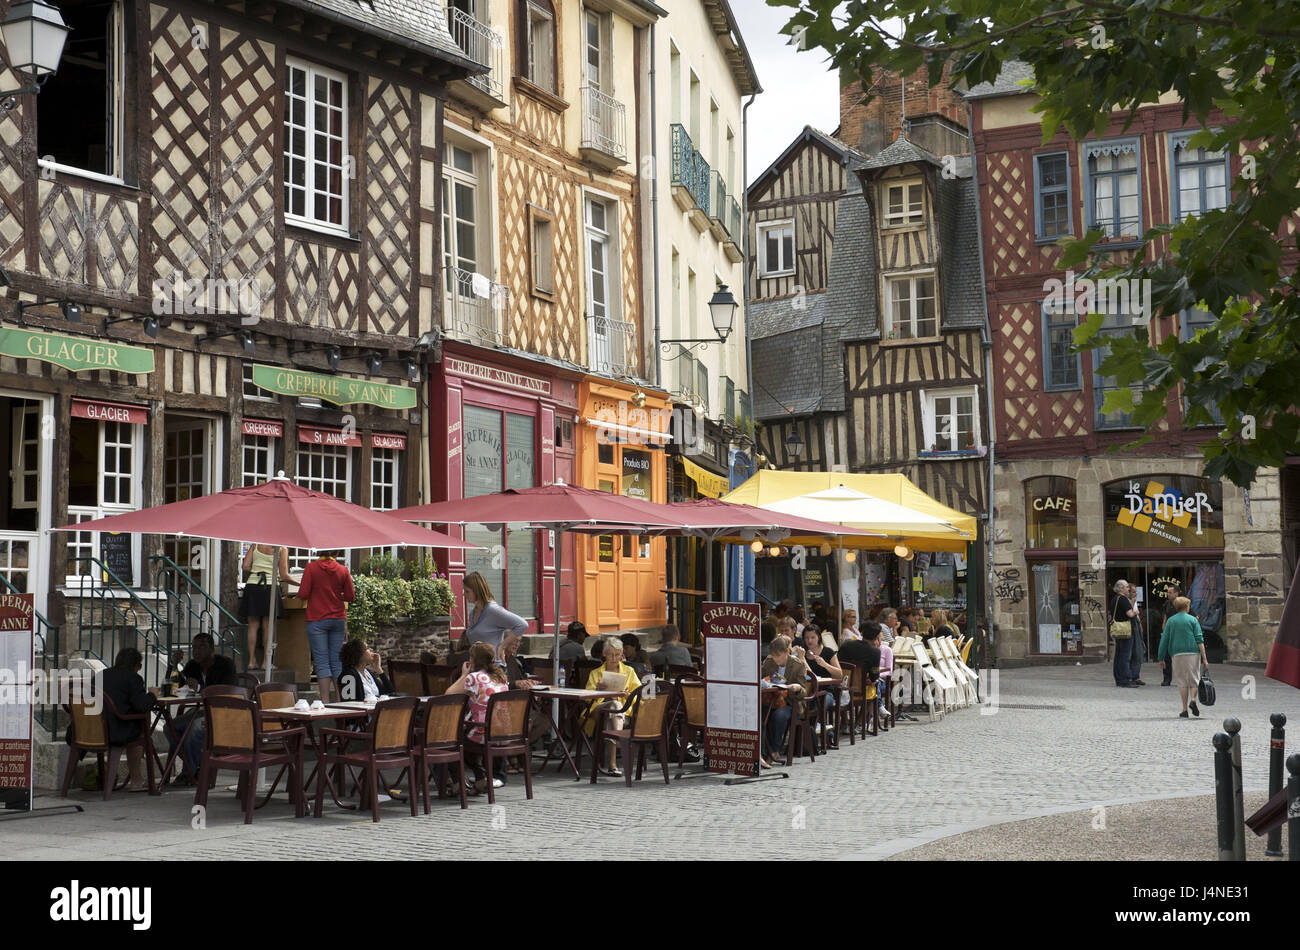 Rennes And Cafe Stock Photos & Rennes And Cafe Stock Images - Alamy